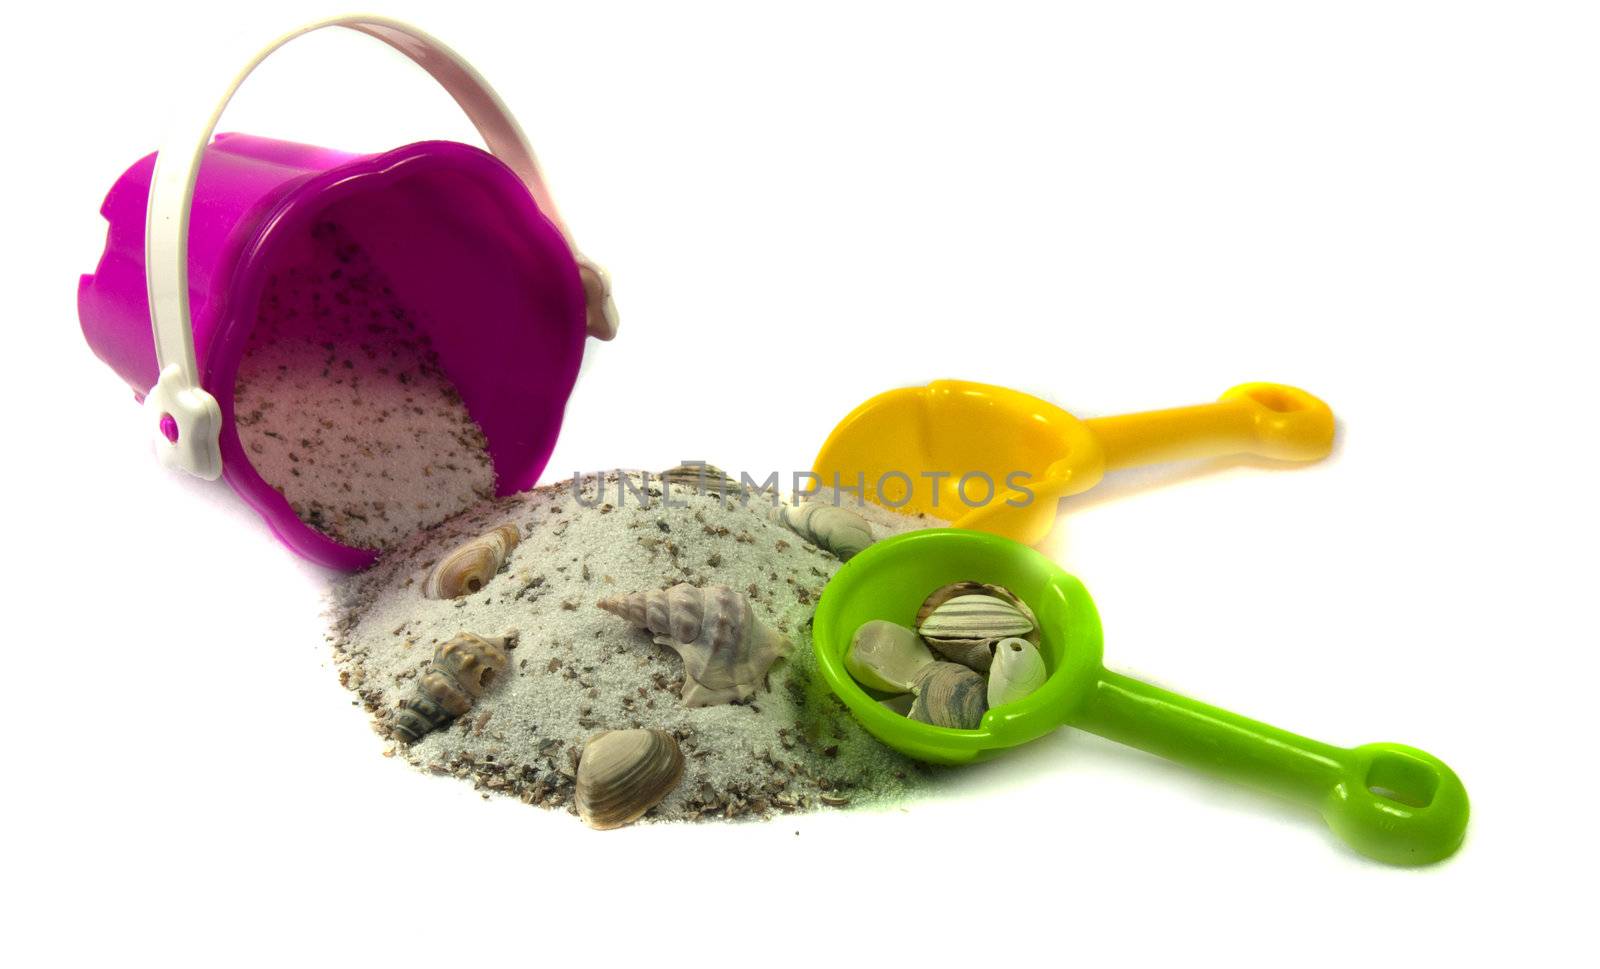 beach toys in different colors for children to play on the beach